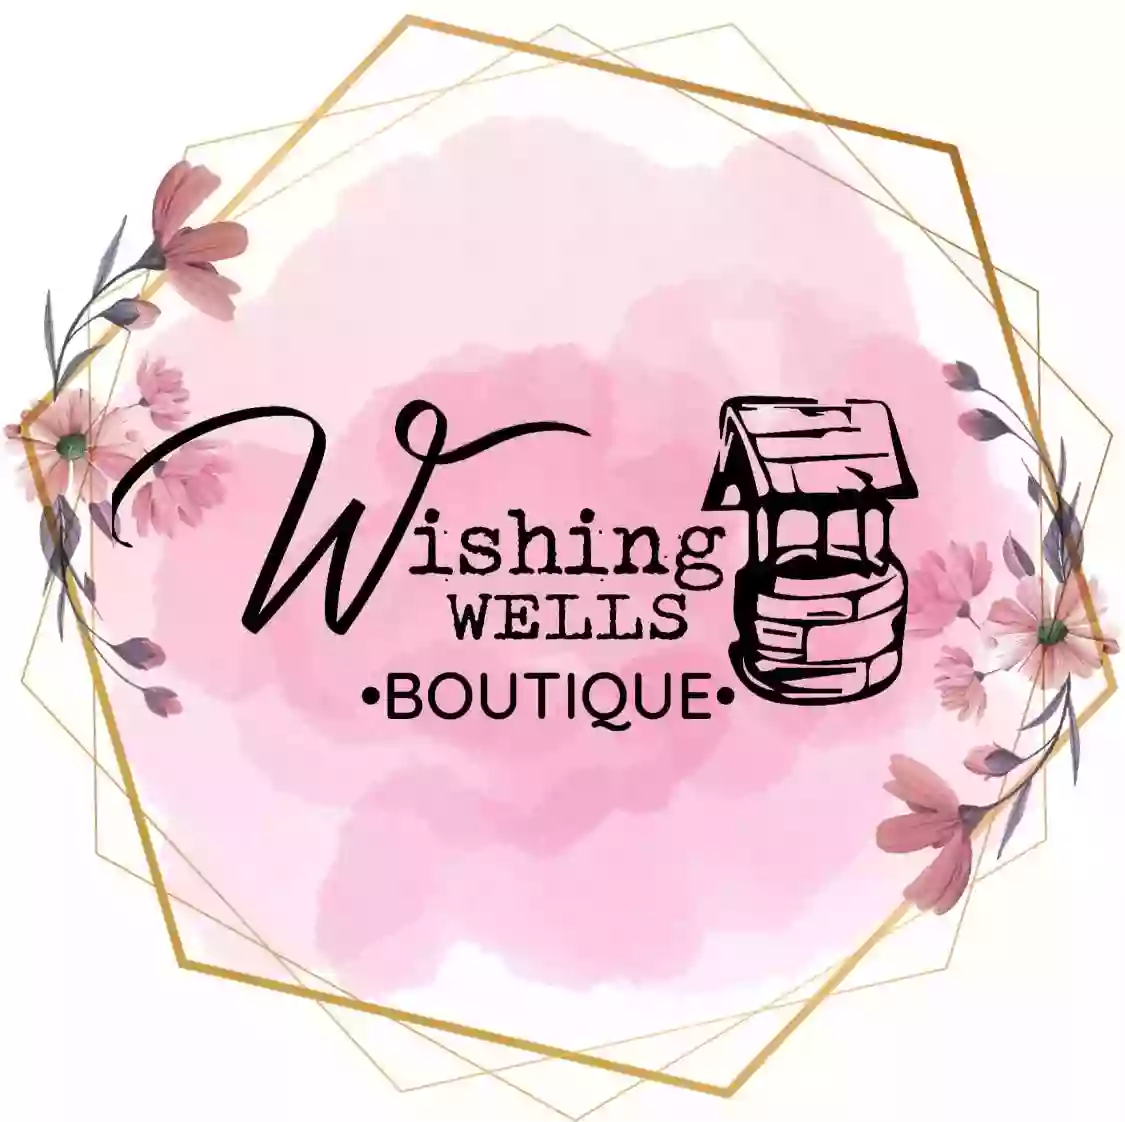 Wishing Wells Boutique and Tuxedos